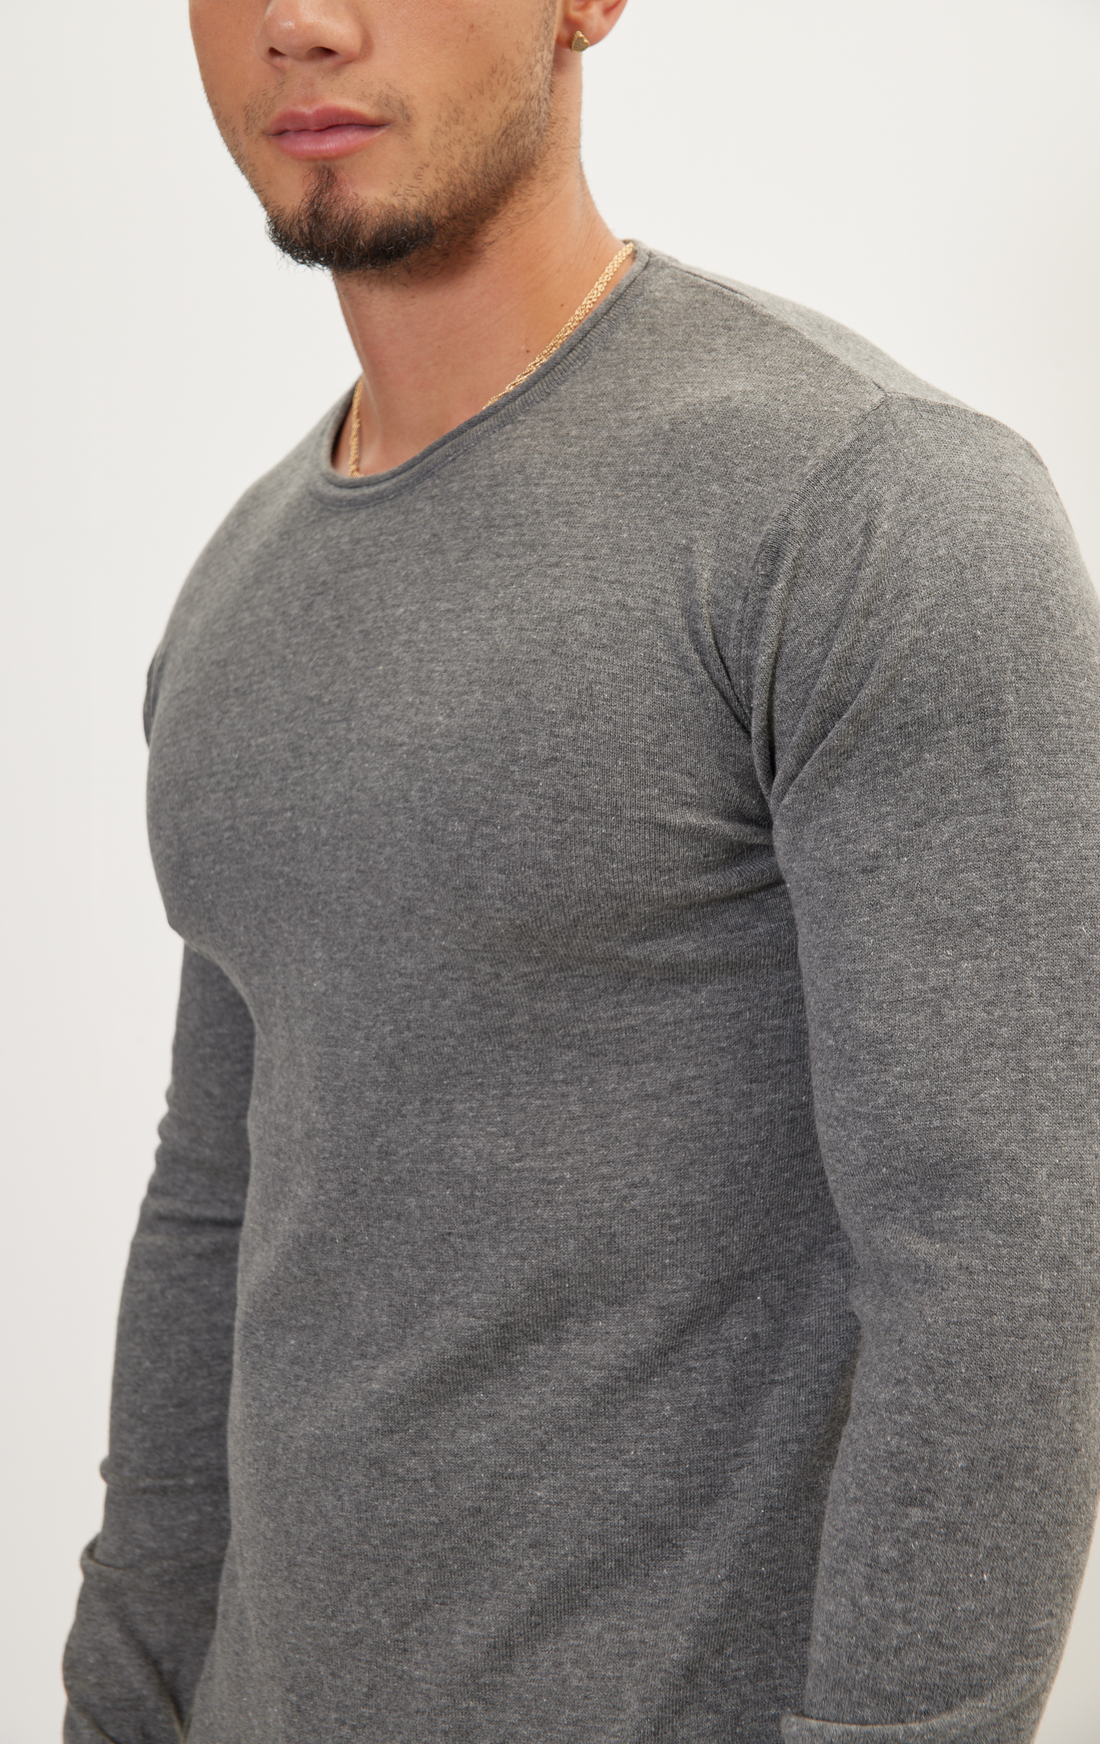 N° 6430 ANTHRACITE SWEATER